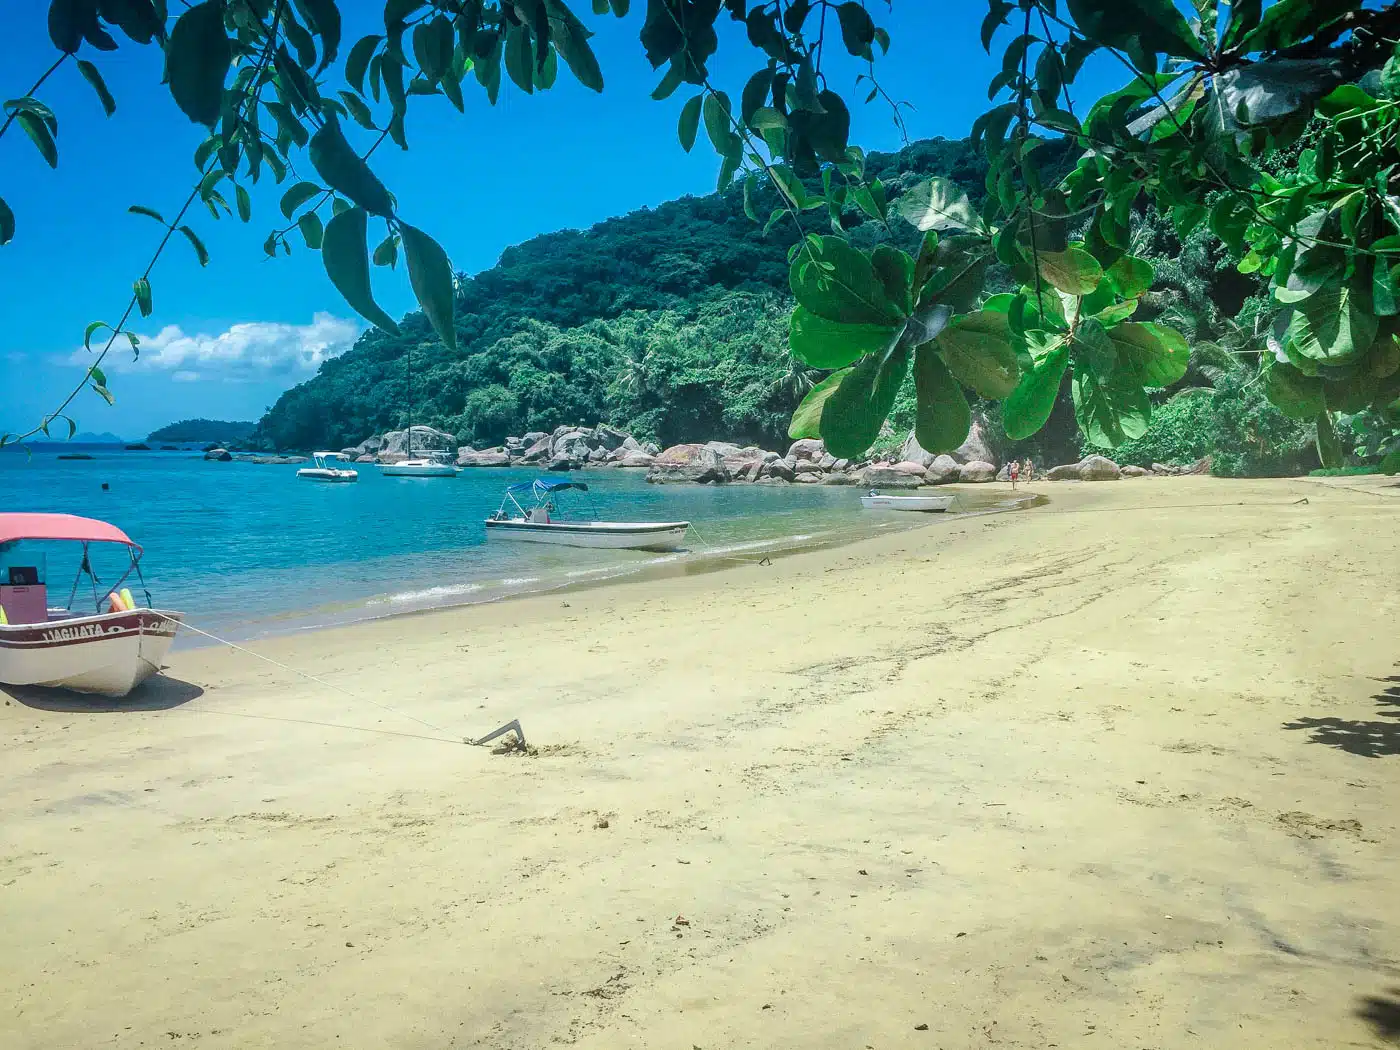 Ilha Grande I South America Travel Bucket List. 90 Awesome Things to do in South America When Backpacking and Travelling #southamerica #bucketlist #traveldestinations 